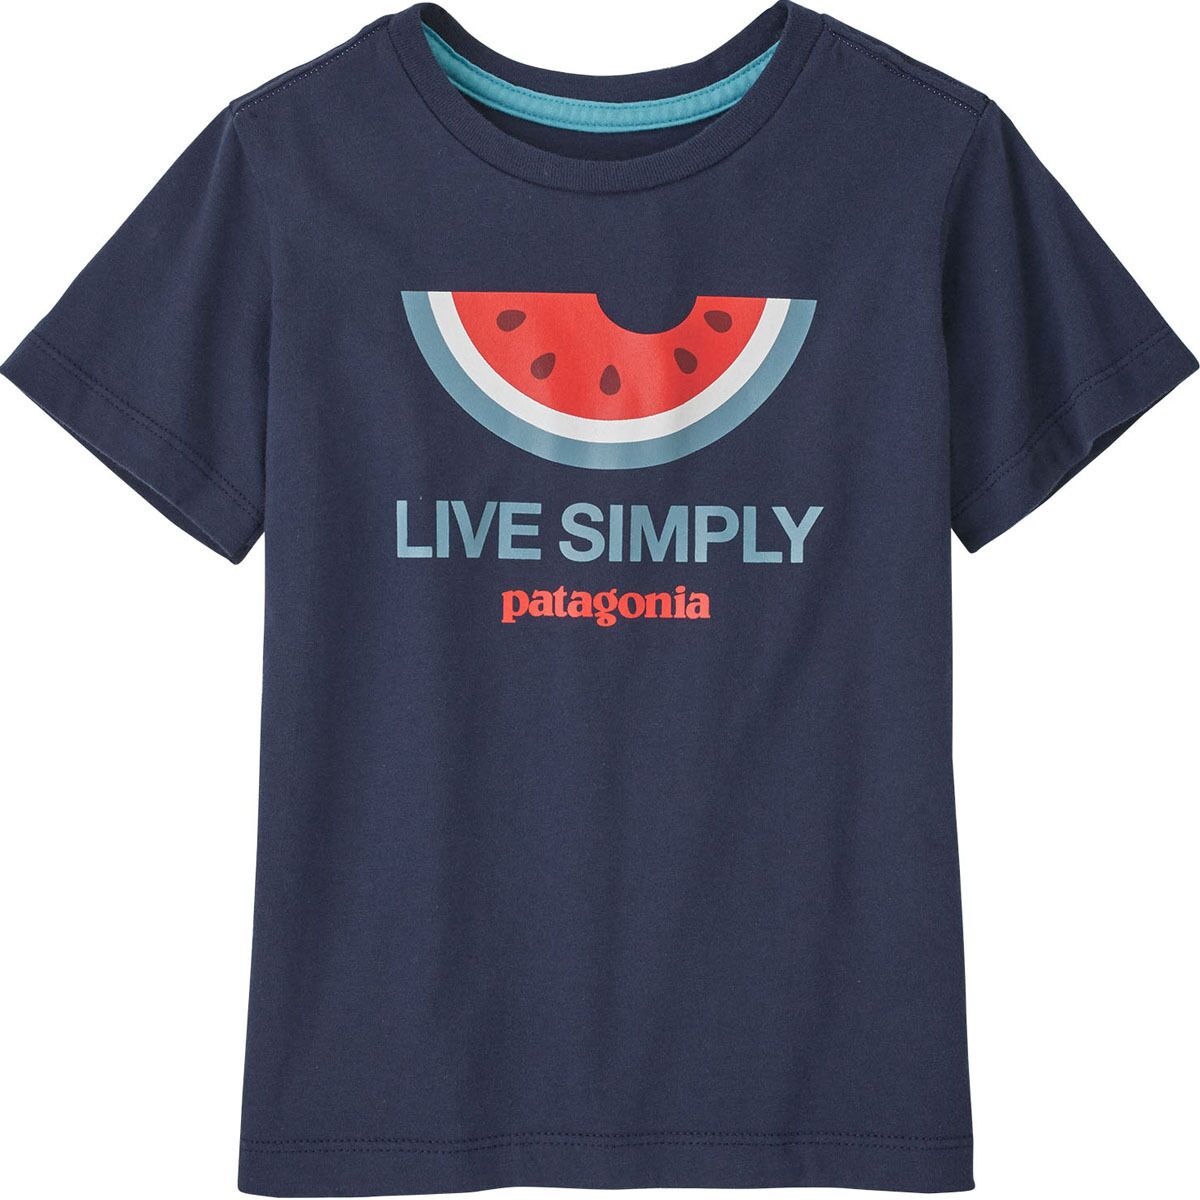 Patagonia- Toddler Baby Regenerative Organic Certified Cotton T-Shirt Live Simply Melon: New Navy